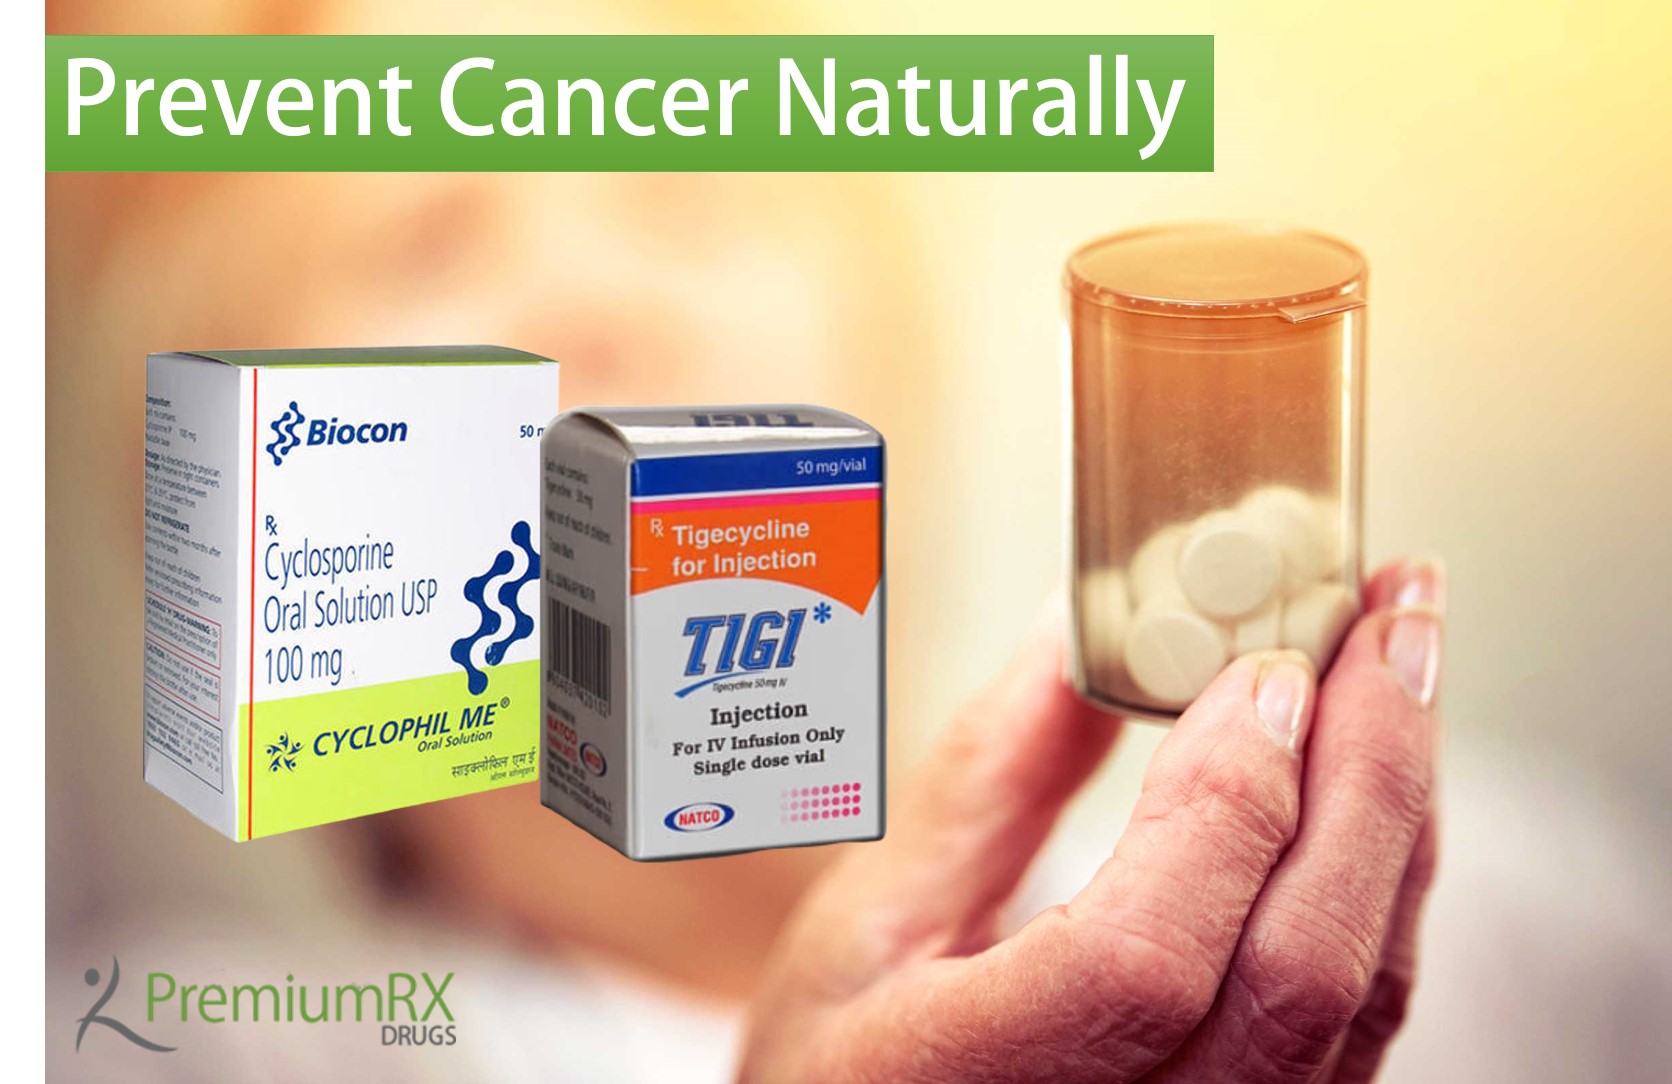 How To Prevent Cancer Naturally